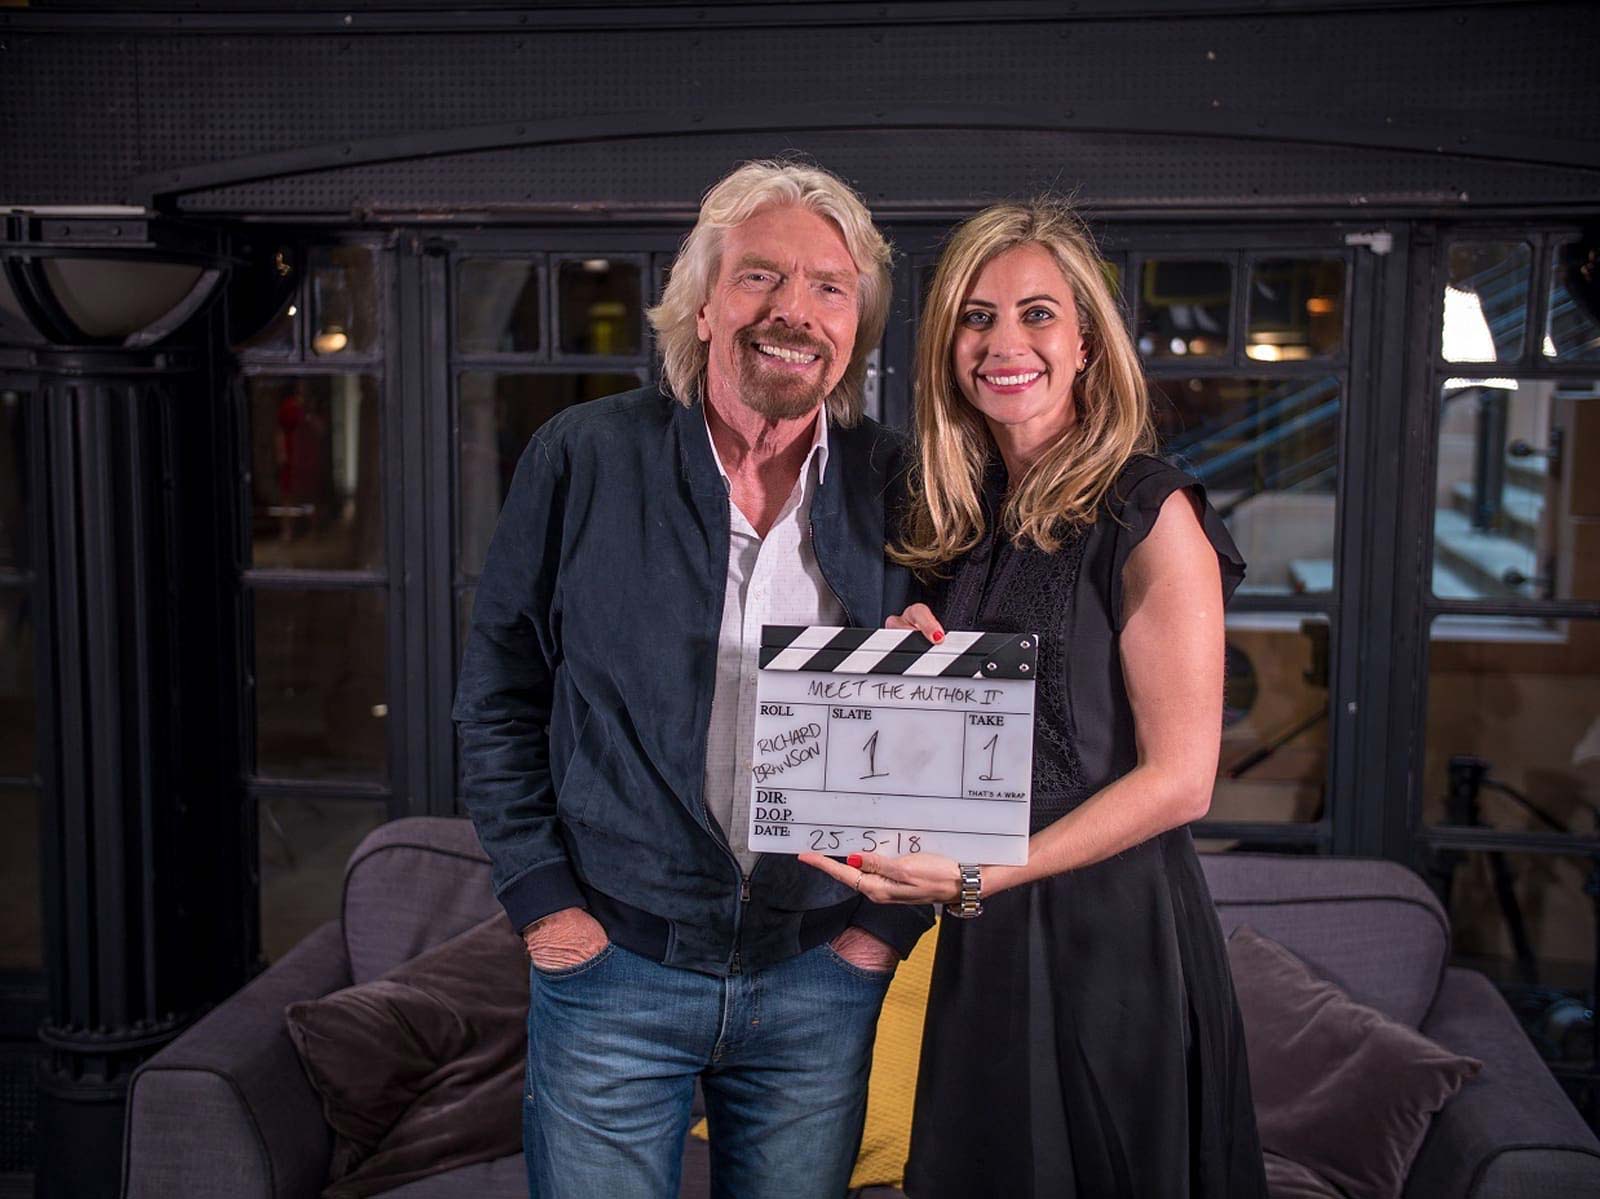 Richard and Holly Branson standing smiling at the camera, Holly is holding a clapperboard